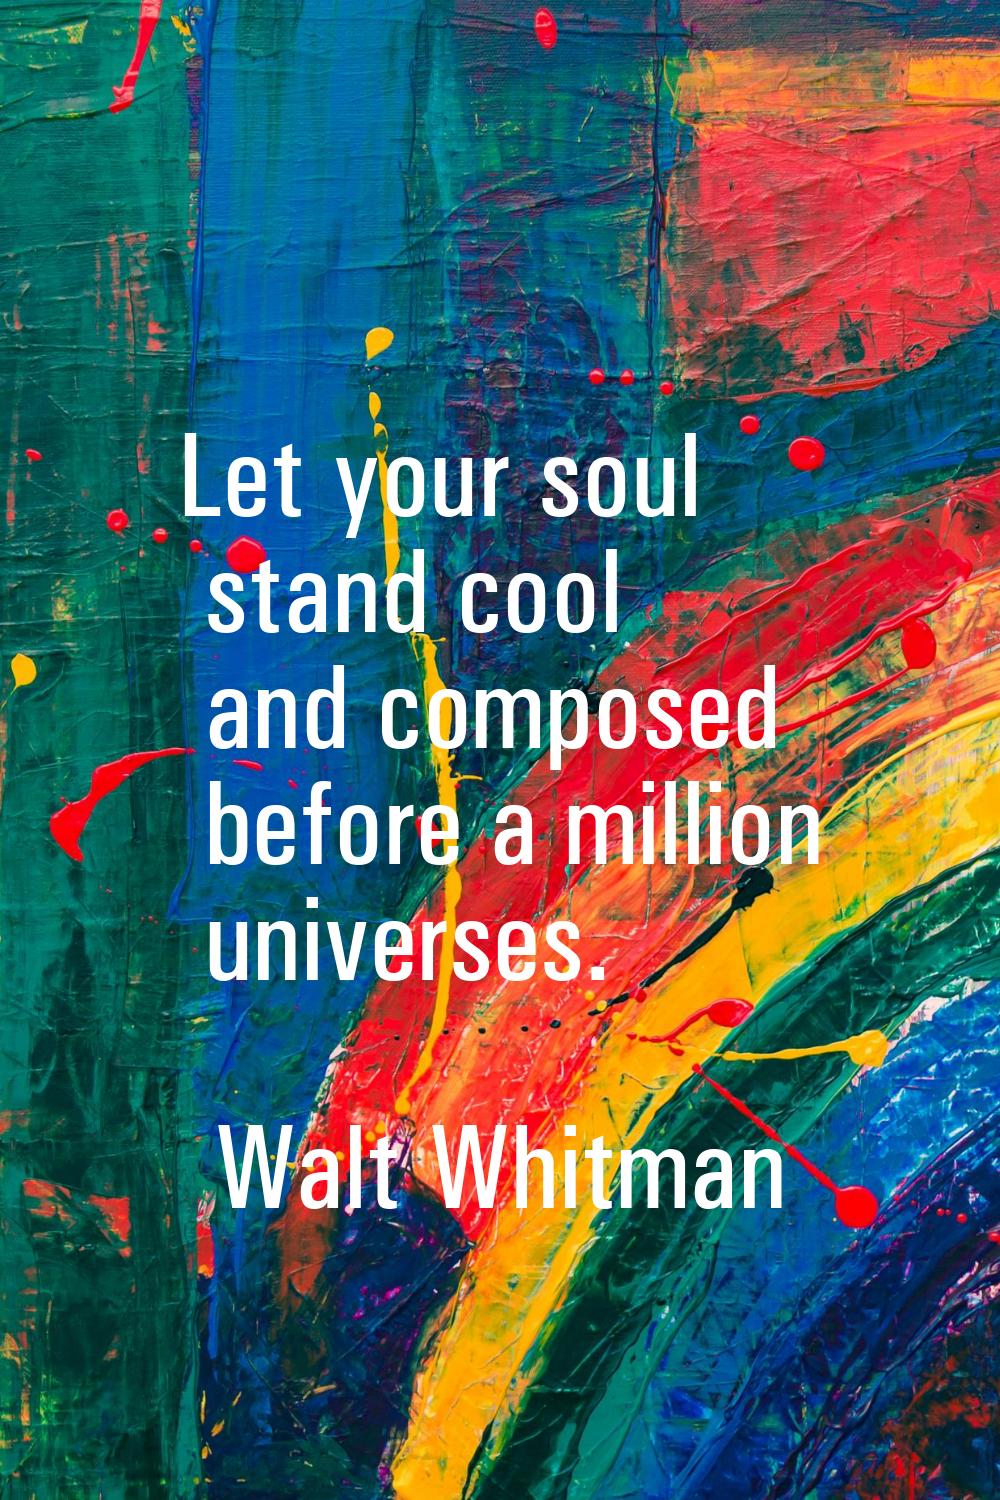 Let your soul stand cool and composed before a million universes.